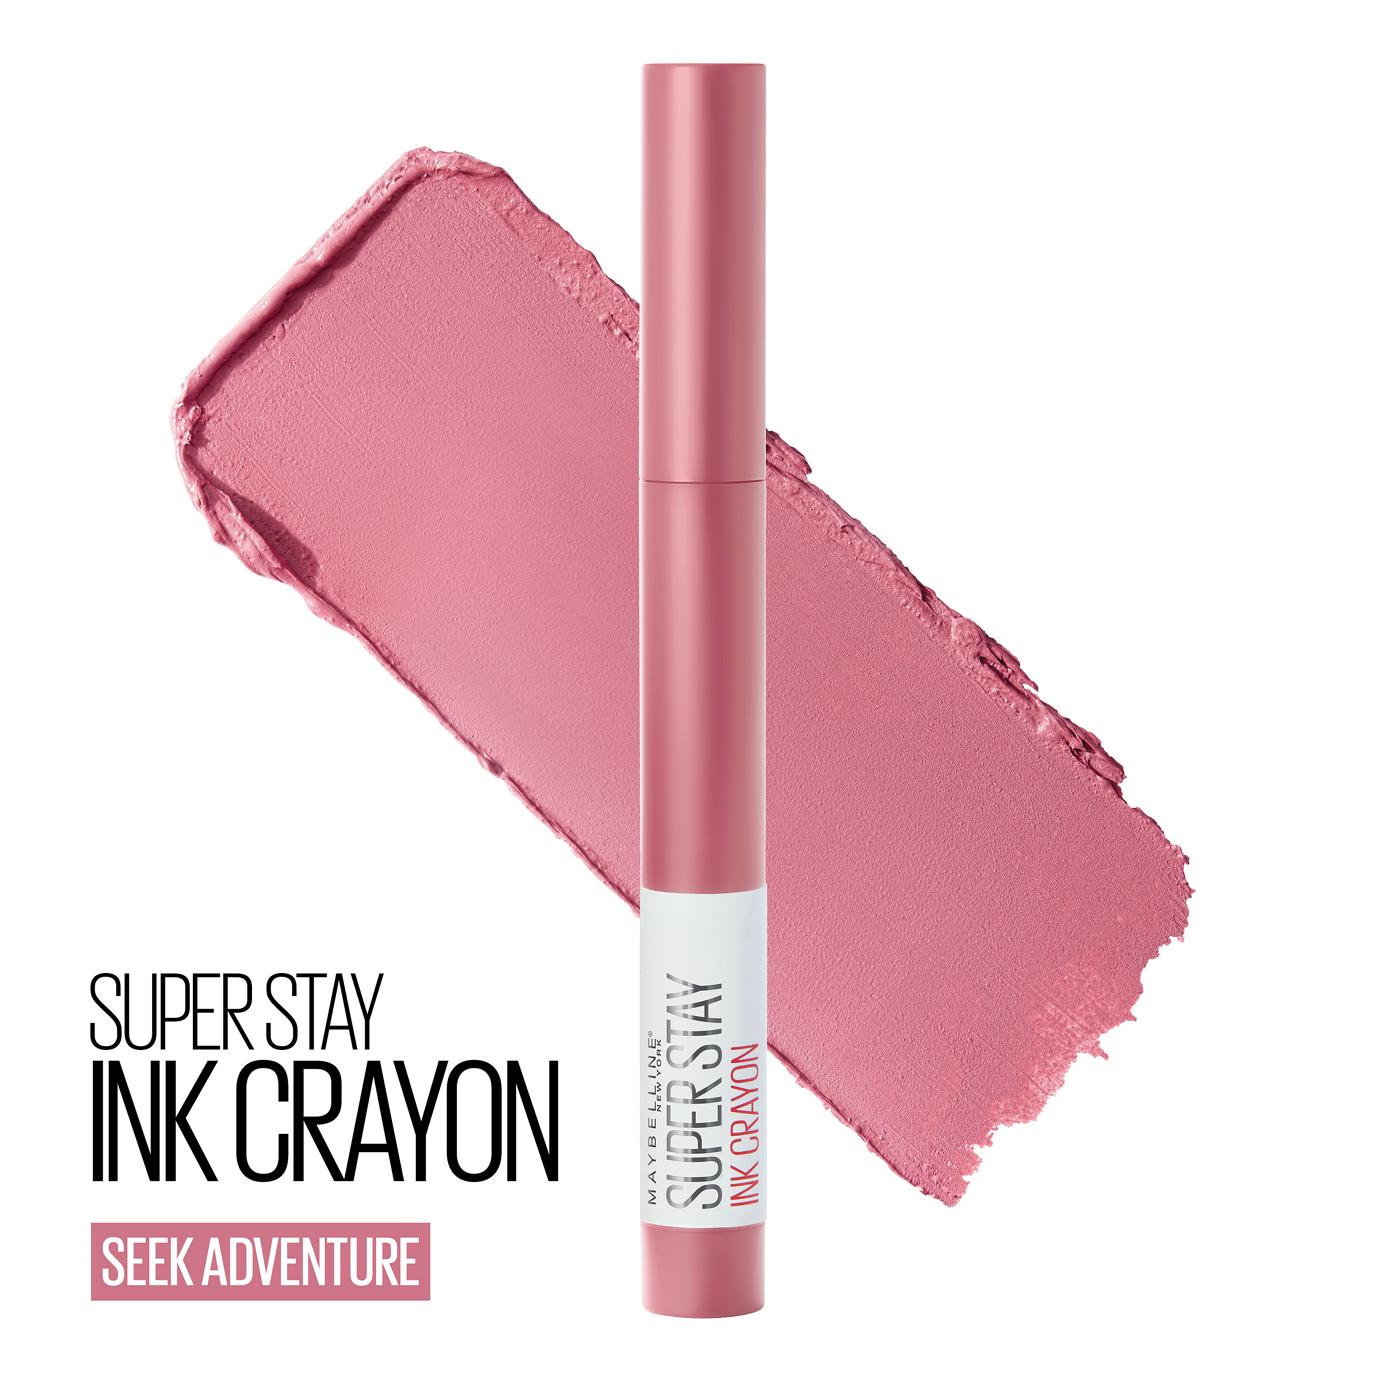 Maybelline Super Stay Ink Crayon Lipstick - Adventure; image 2 of 5